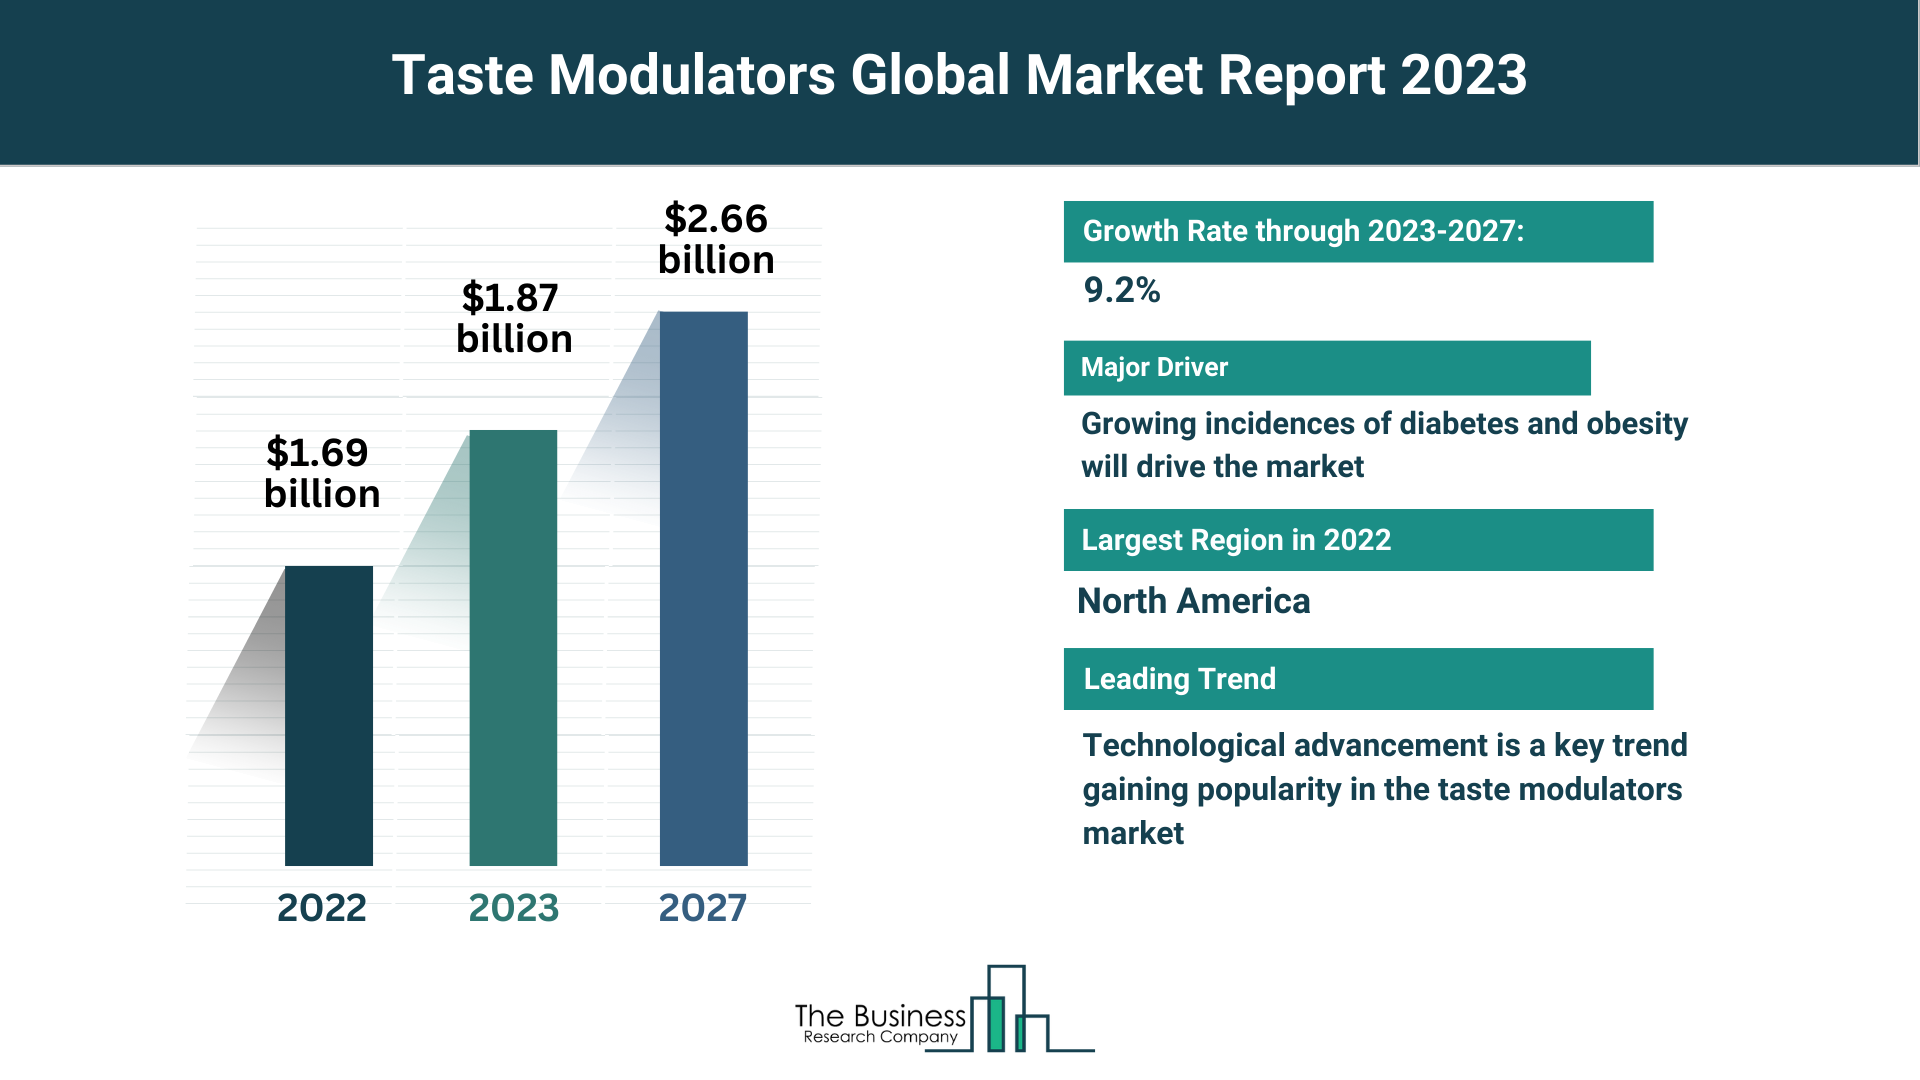 Global Taste Modulators Market Analysis: Size, Drivers, Trends, Opportunities And Strategies